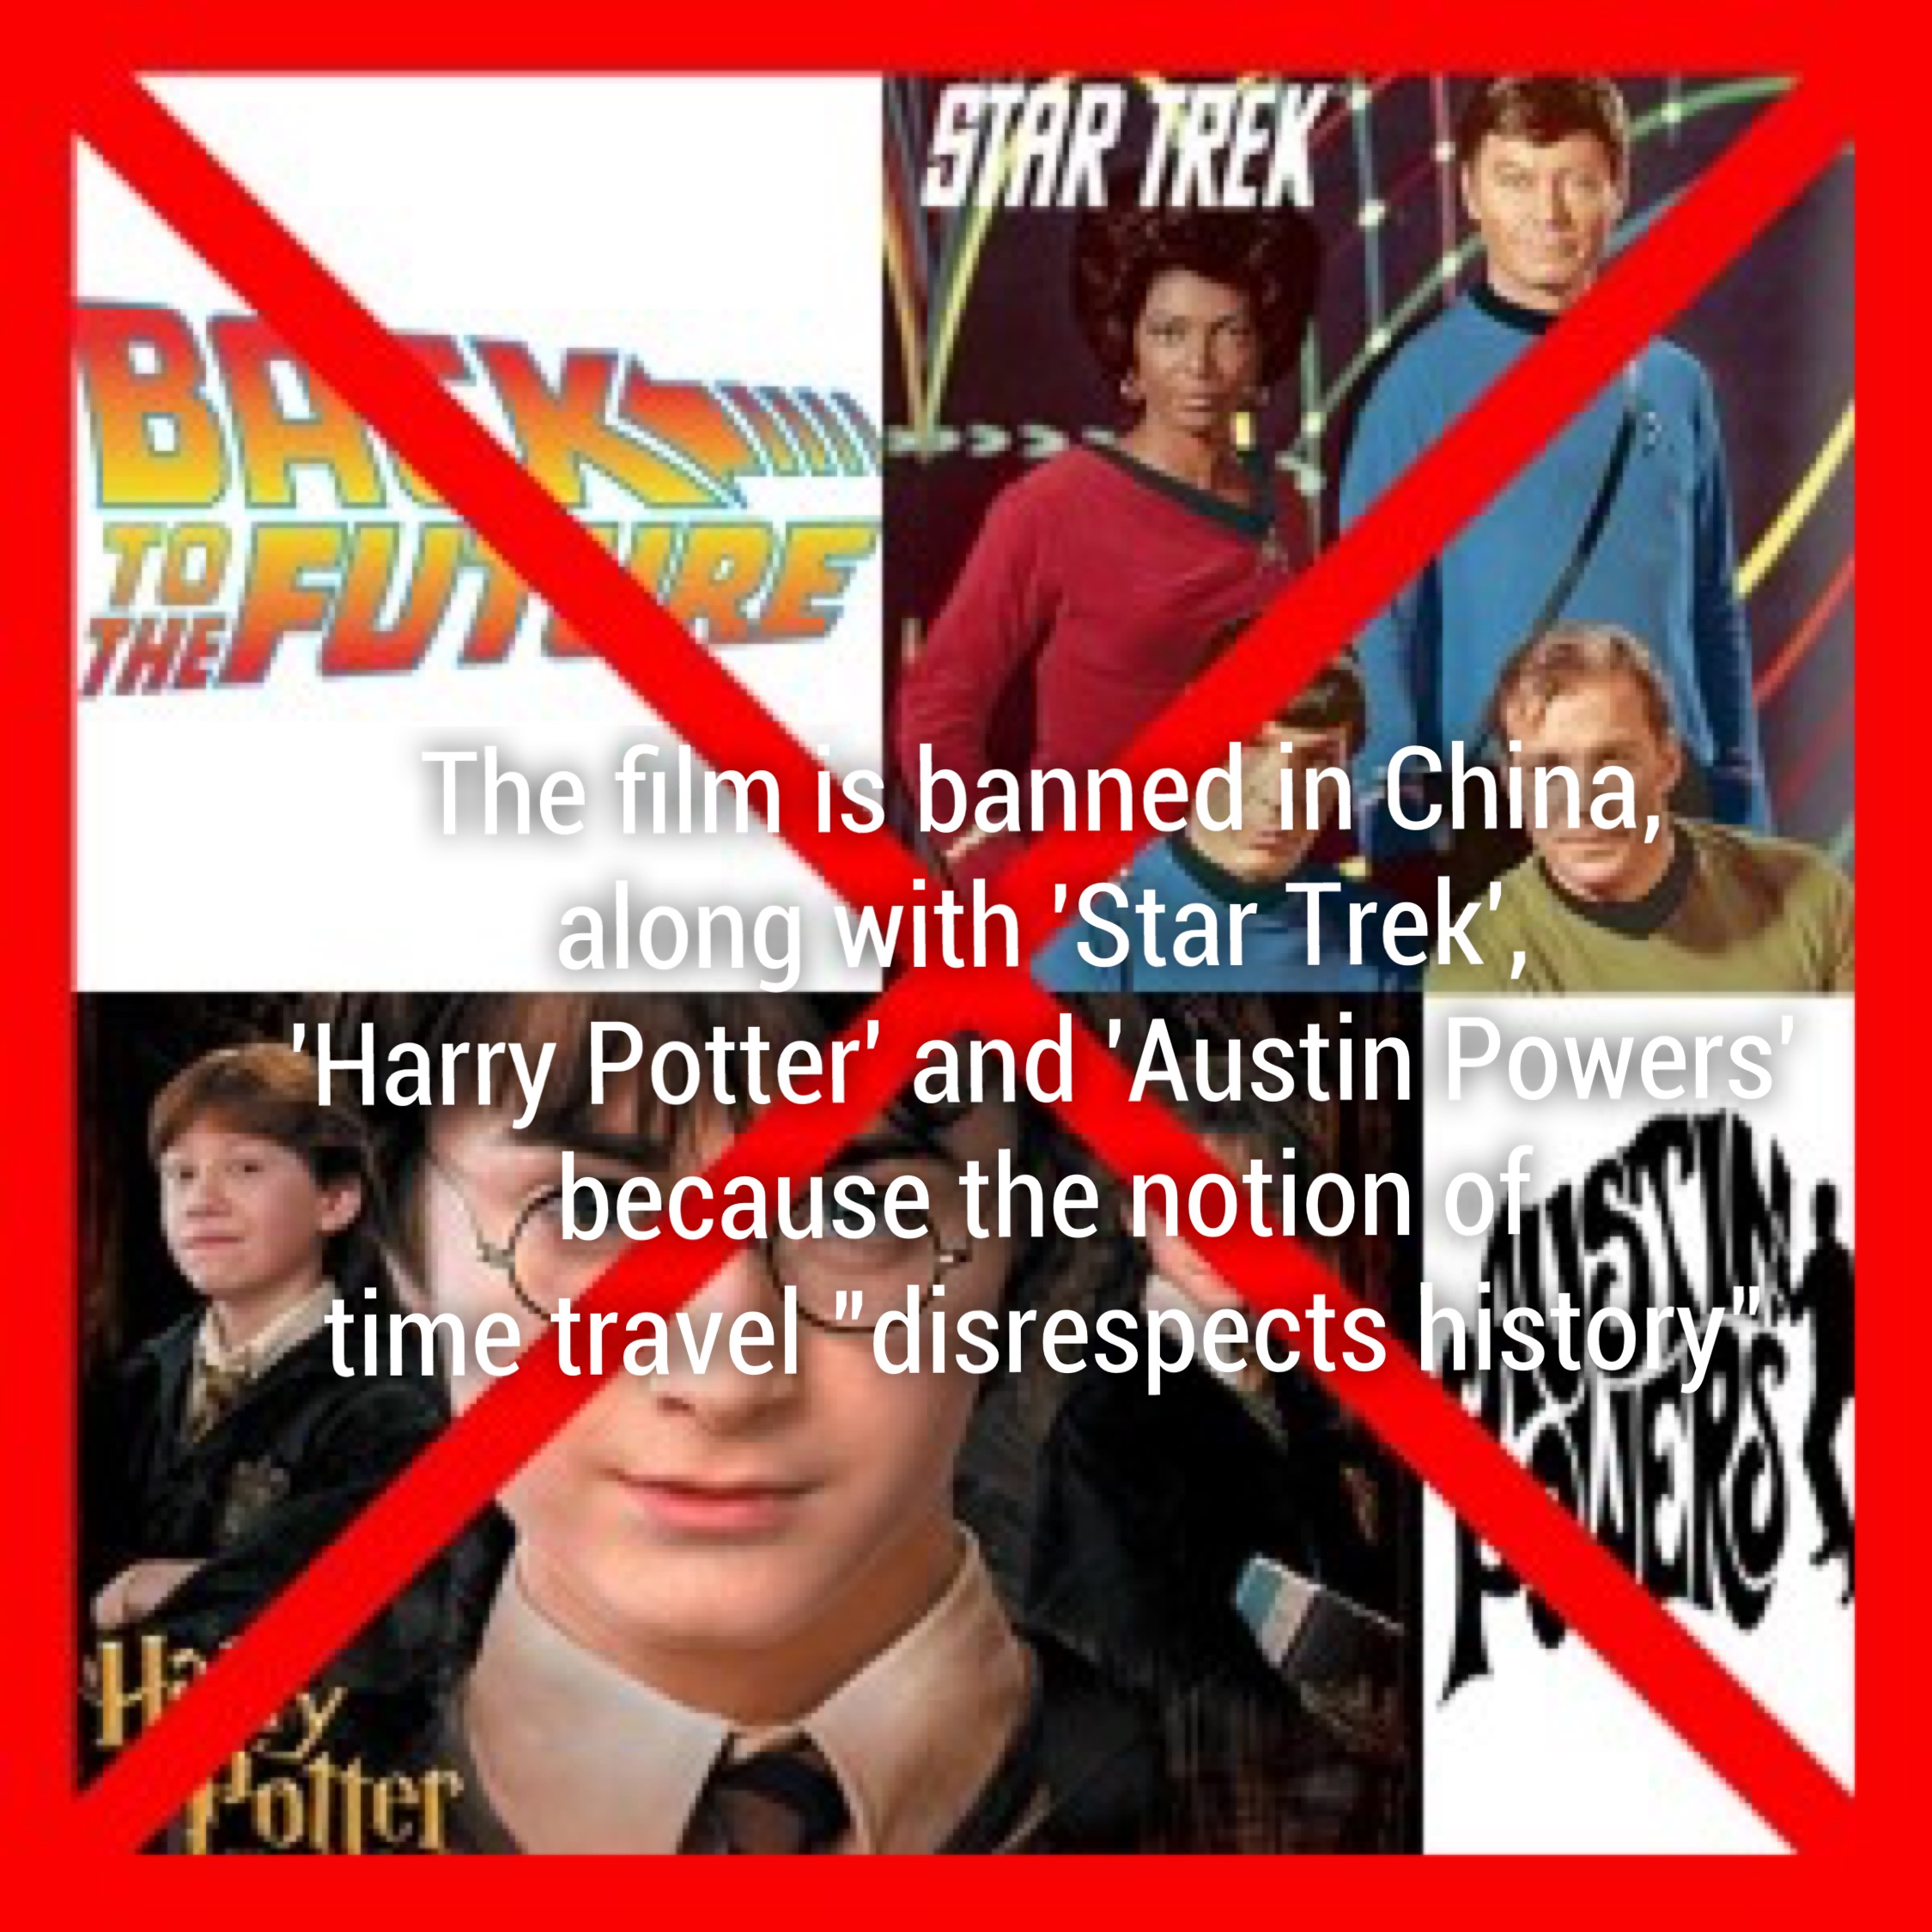 no more harry potter - Star Trek The film is banned in China, along with 'Star Trek', "Harry Potter' and 'Austin Powers' because the notion Orati travel "disrespects his Witroc